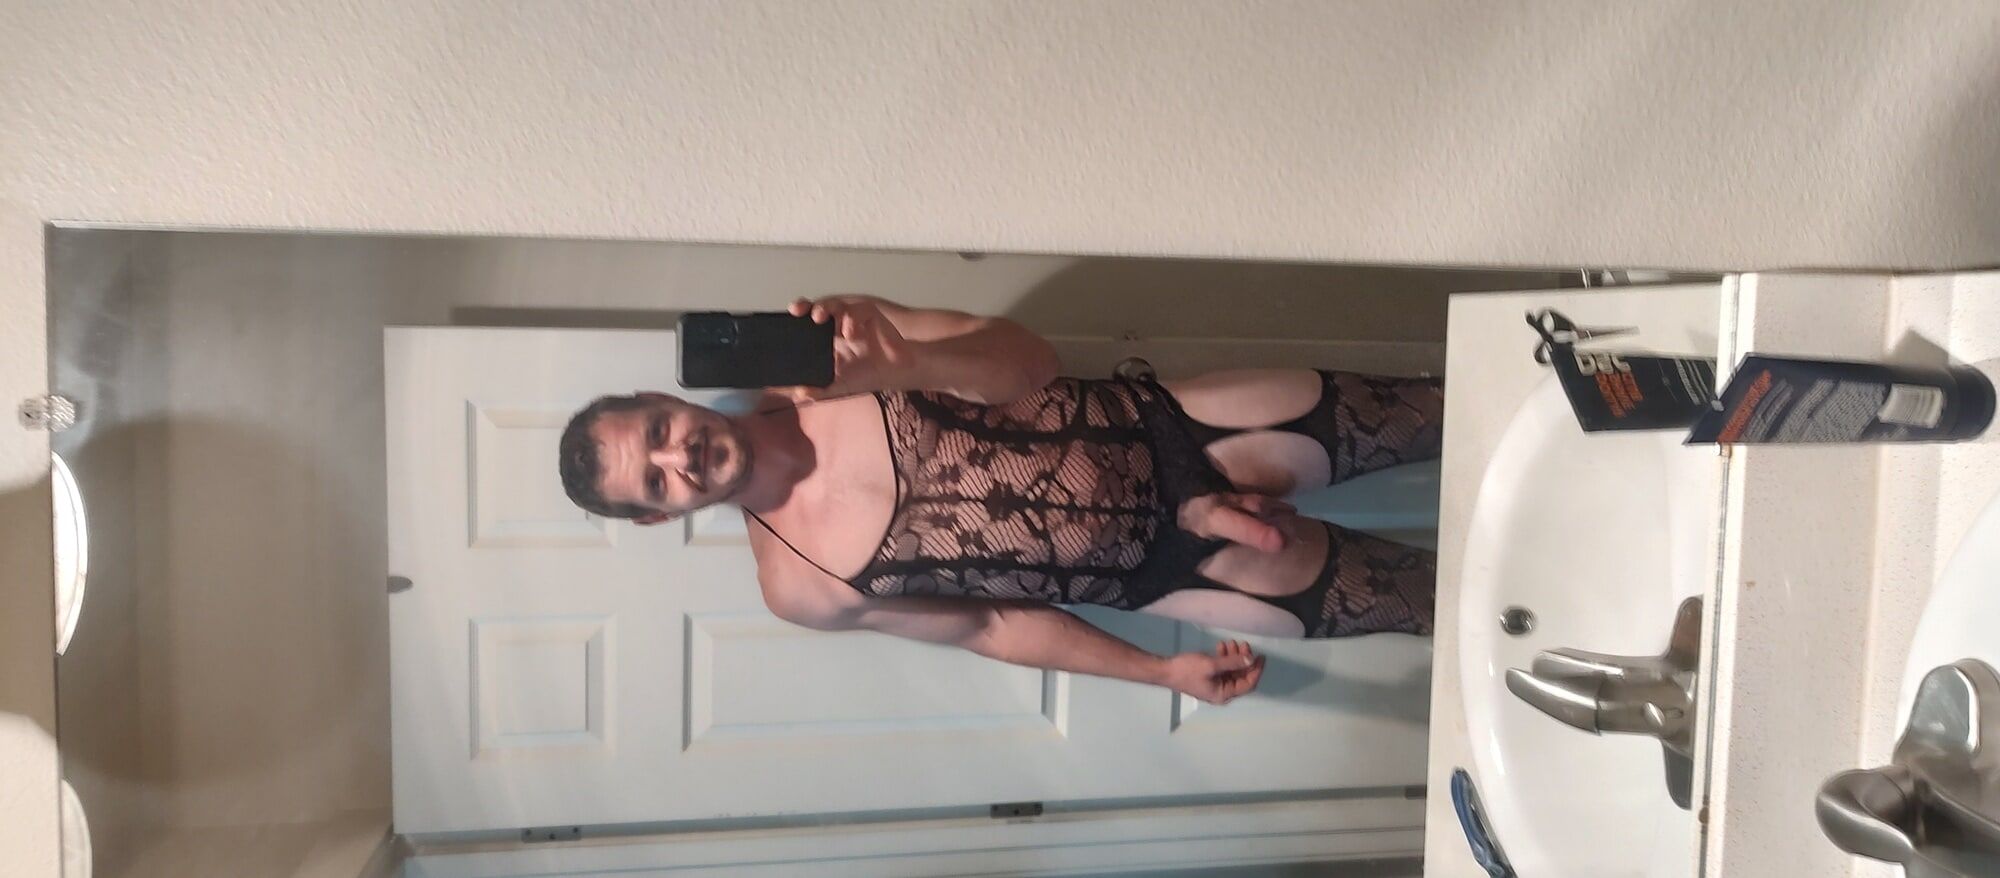 Me in sexy lengerie